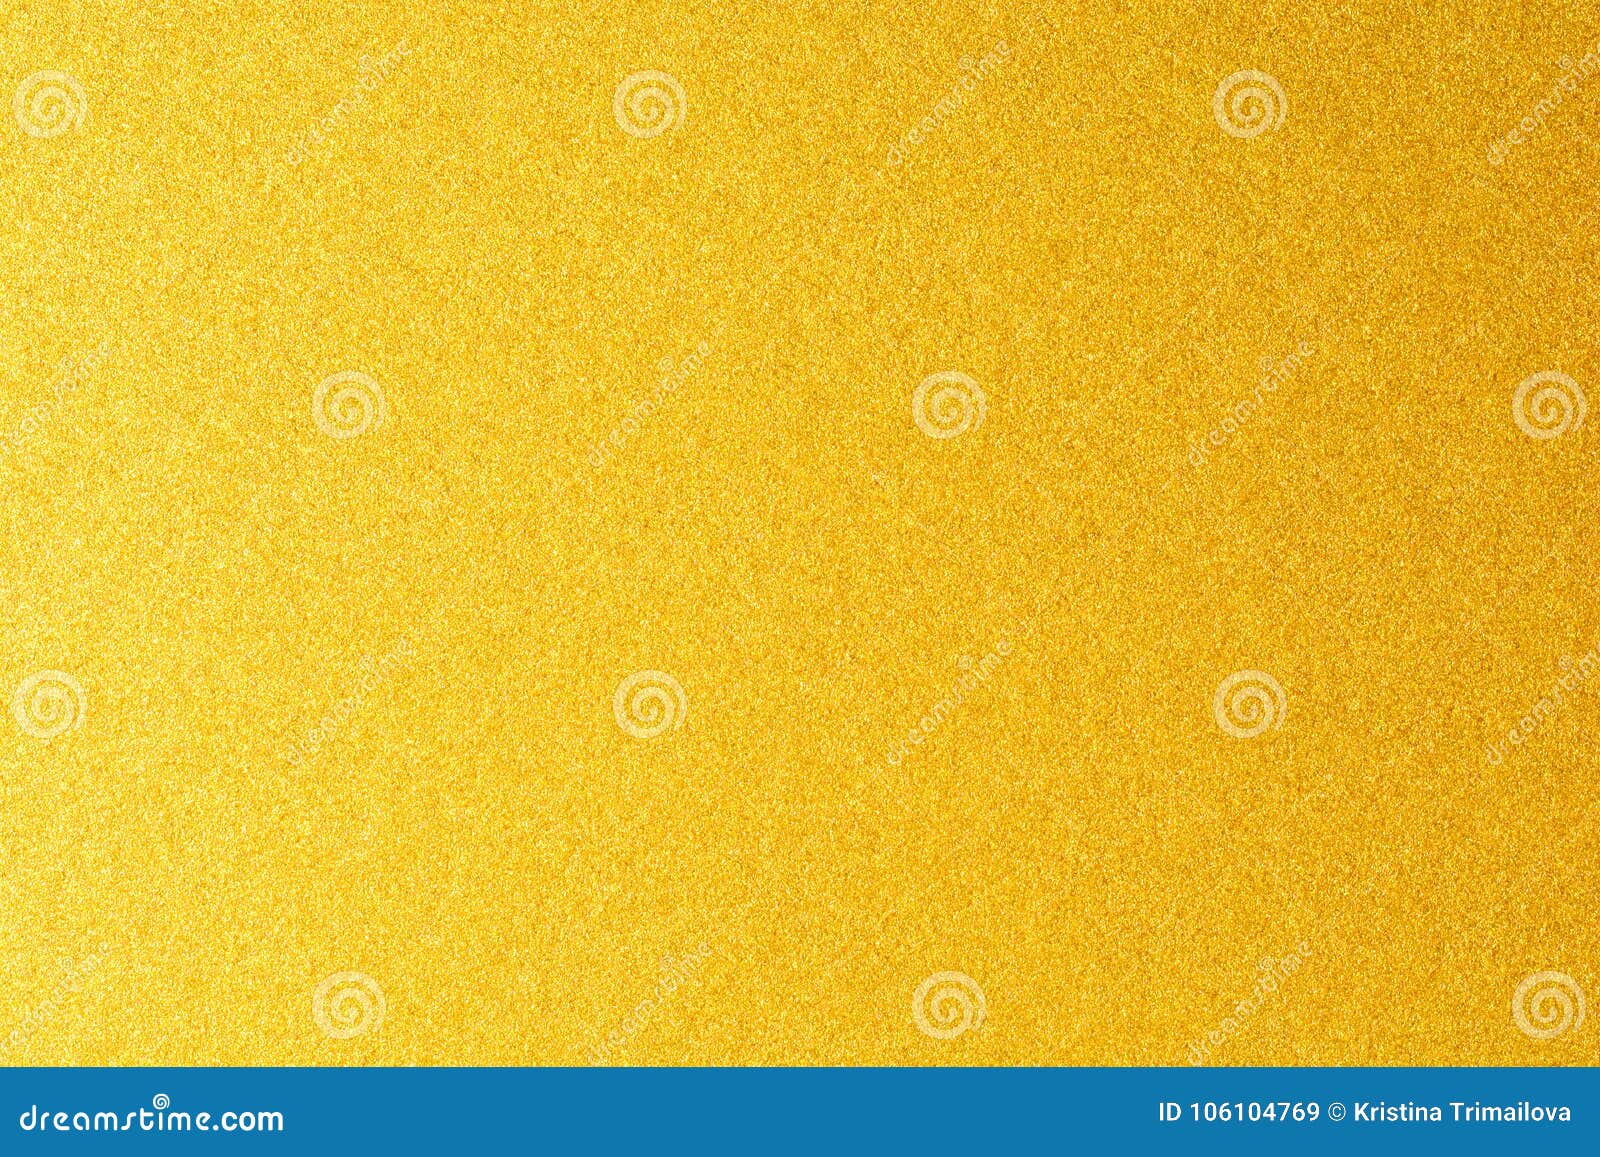 details of golden texture background. gold color paint wall. luxury golden background and wallpaper. gold foil or